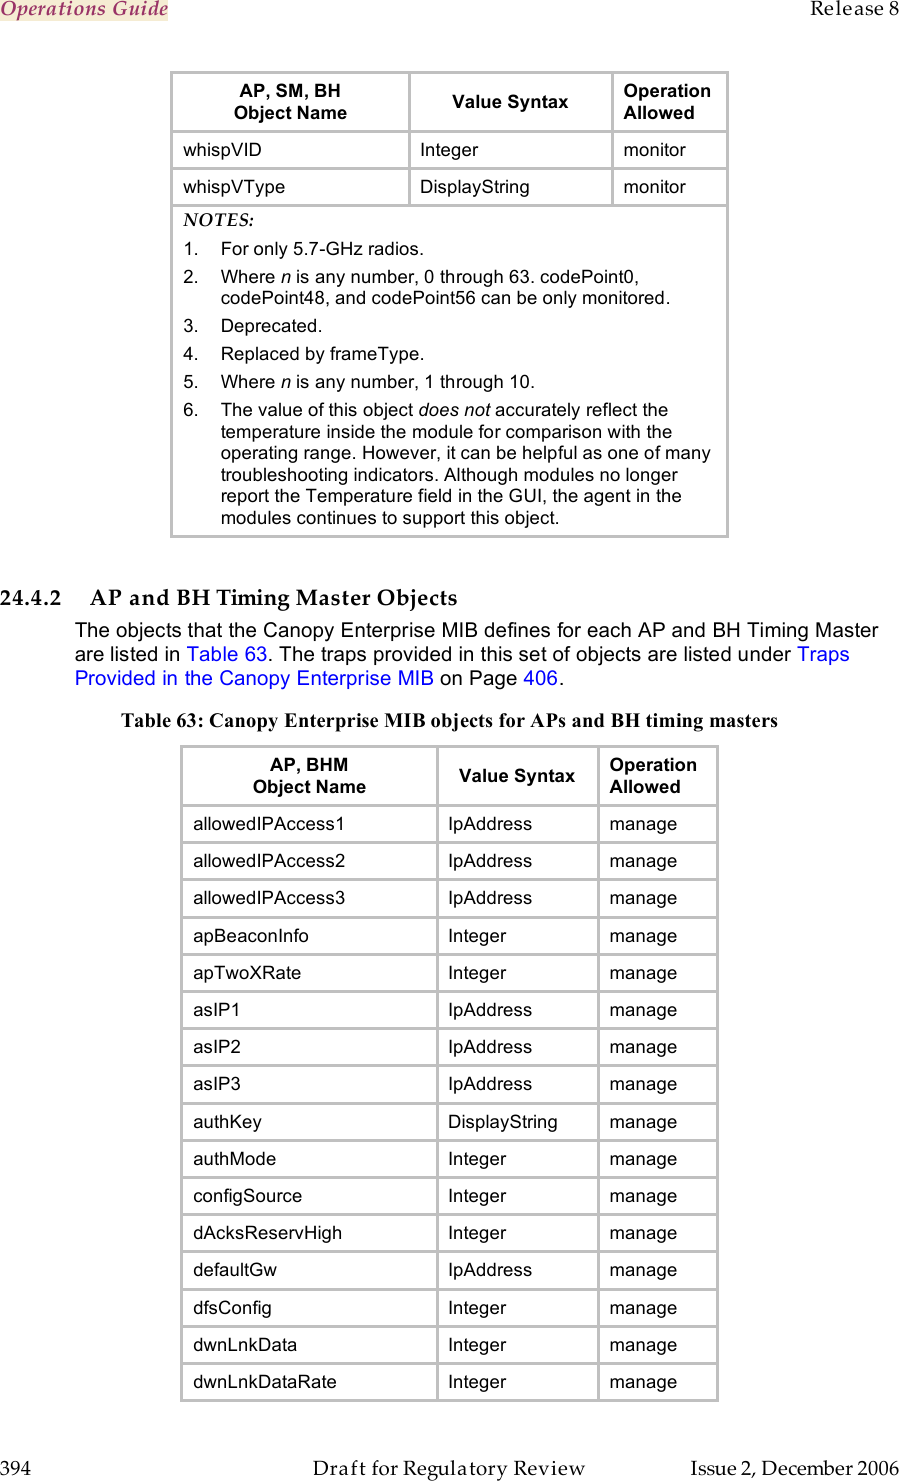 Operations Guide    Release 8   394  Draft for Regulatory Review  Issue 2, December 2006 AP, SM, BH Object Name Value Syntax Operation  Allowed whispVID Integer monitor whispVType DisplayString monitor NOTES: 1.  For only 5.7-GHz radios. 2.  Where n is any number, 0 through 63. codePoint0, codePoint48, and codePoint56 can be only monitored. 3.  Deprecated. 4.  Replaced by frameType. 5.  Where n is any number, 1 through 10. 6.  The value of this object does not accurately reflect the temperature inside the module for comparison with the operating range. However, it can be helpful as one of many troubleshooting indicators. Although modules no longer report the Temperature field in the GUI, the agent in the modules continues to support this object.   24.4.2 AP and BH Timing Master Objects The objects that the Canopy Enterprise MIB defines for each AP and BH Timing Master are listed in Table 63. The traps provided in this set of objects are listed under Traps Provided in the Canopy Enterprise MIB on Page 406. Table 63: Canopy Enterprise MIB objects for APs and BH timing masters AP, BHM Object Name Value Syntax Operation Allowed allowedIPAccess1 IpAddress manage allowedIPAccess2 IpAddress manage allowedIPAccess3 IpAddress manage apBeaconInfo Integer manage apTwoXRate Integer manage asIP1 IpAddress manage asIP2 IpAddress manage asIP3 IpAddress manage authKey DisplayString manage authMode Integer manage configSource Integer manage dAcksReservHigh Integer manage defaultGw IpAddress manage dfsConfig Integer manage dwnLnkData Integer manage dwnLnkDataRate Integer manage 